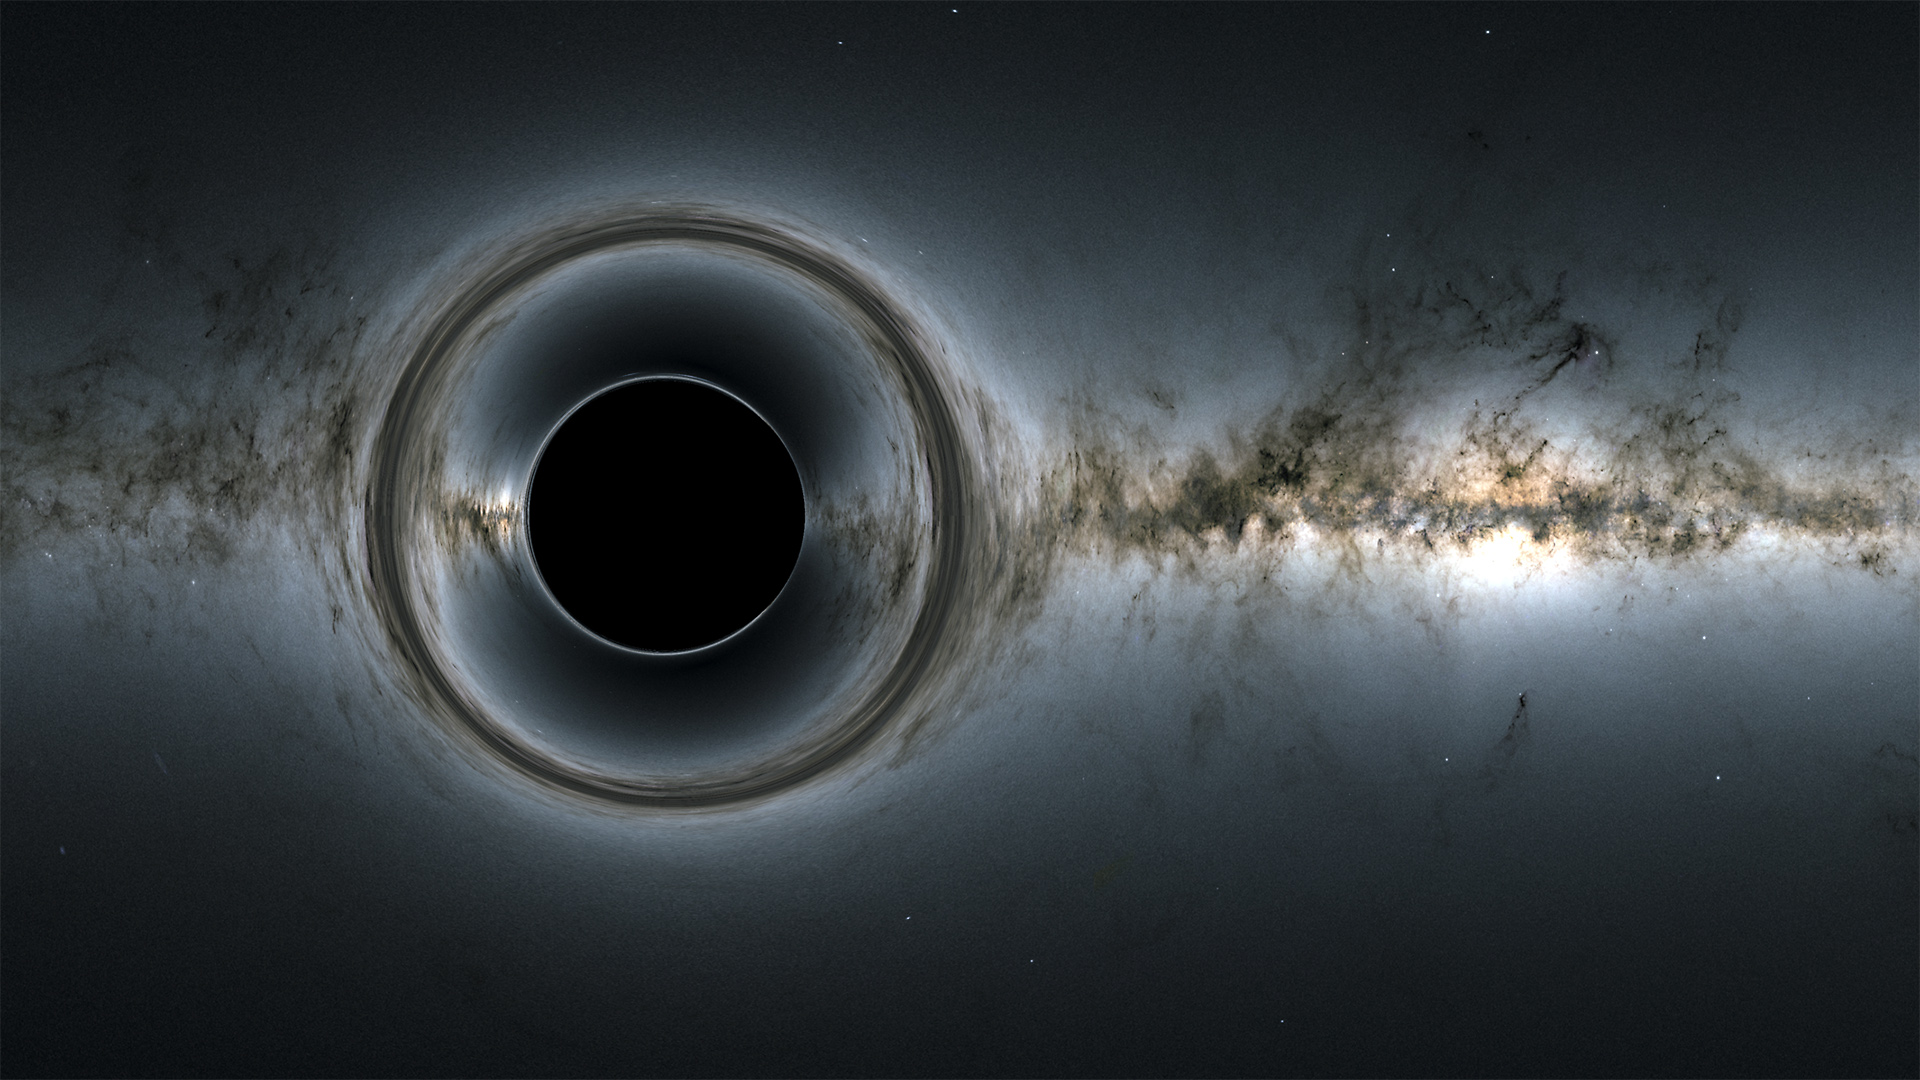 Astronomers want your help to spot hidden black holes